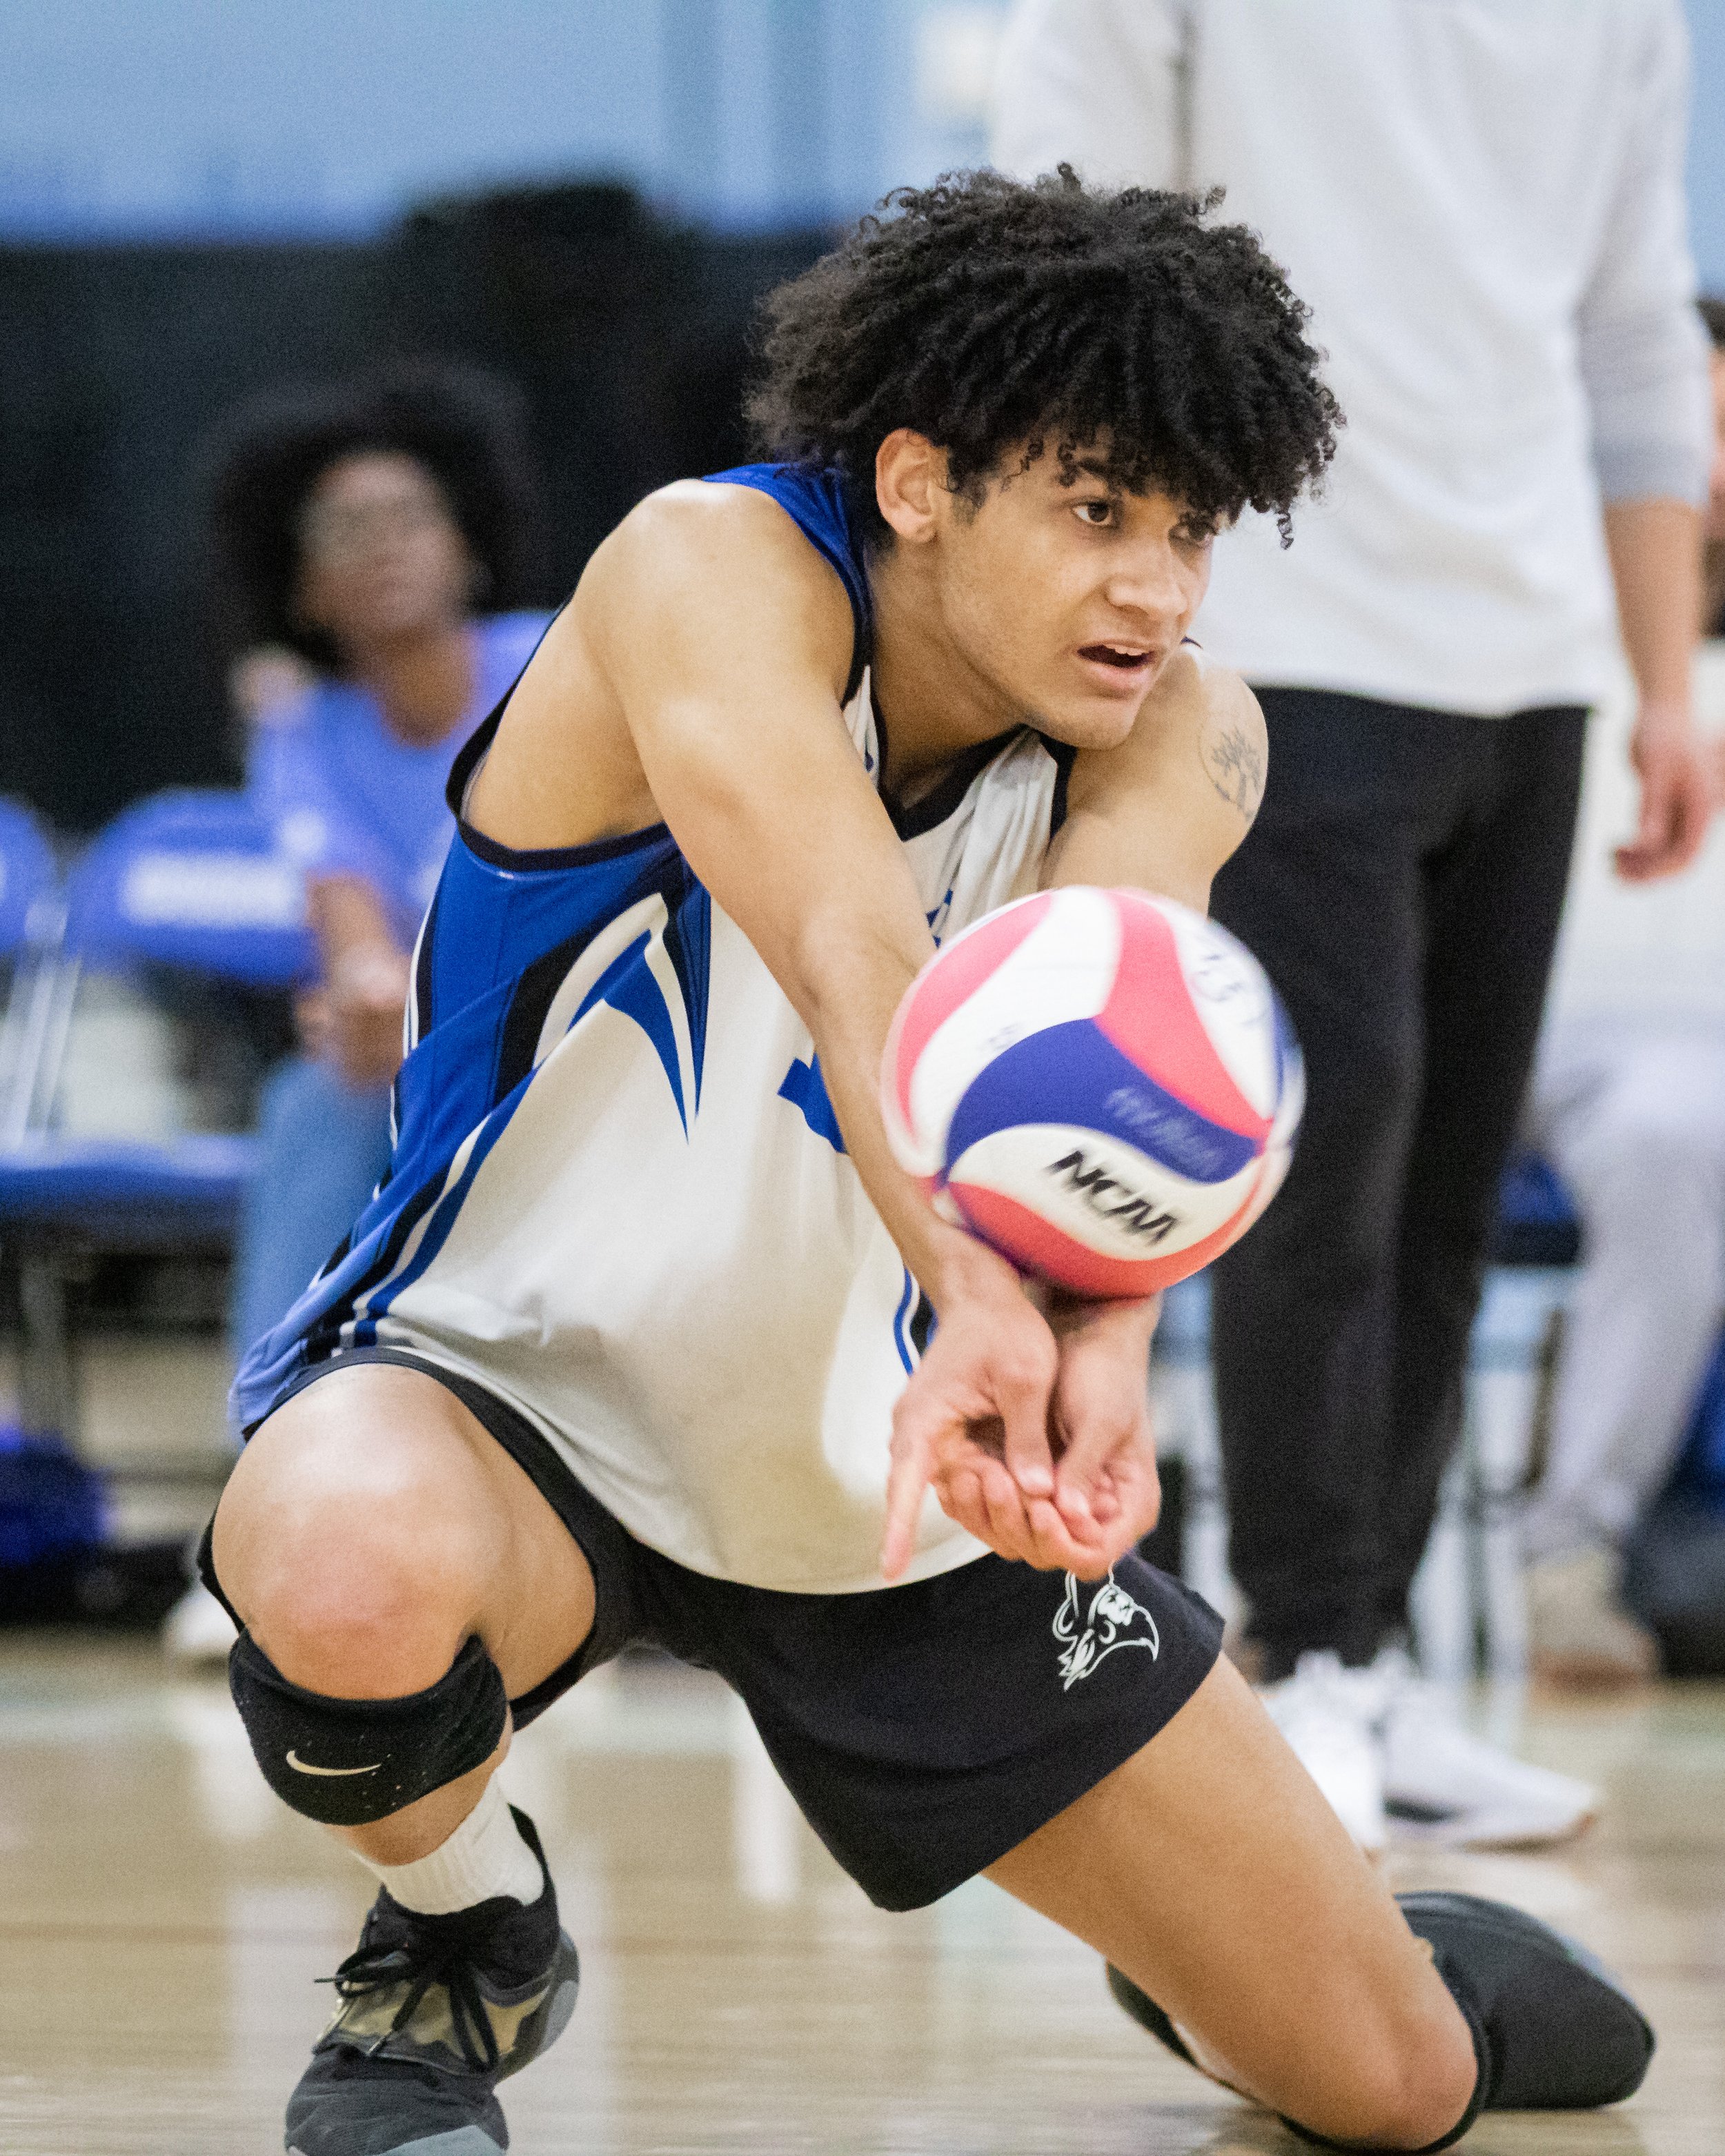  Santa Monica College Corsair outside hitter Nate Davis (10) bumping the ball after a serve during the third set of a home game against Santa Barbara City College Vaqueros in Santa Monica, Calif., on Friday, March 24, 2023. The game resulted in the C